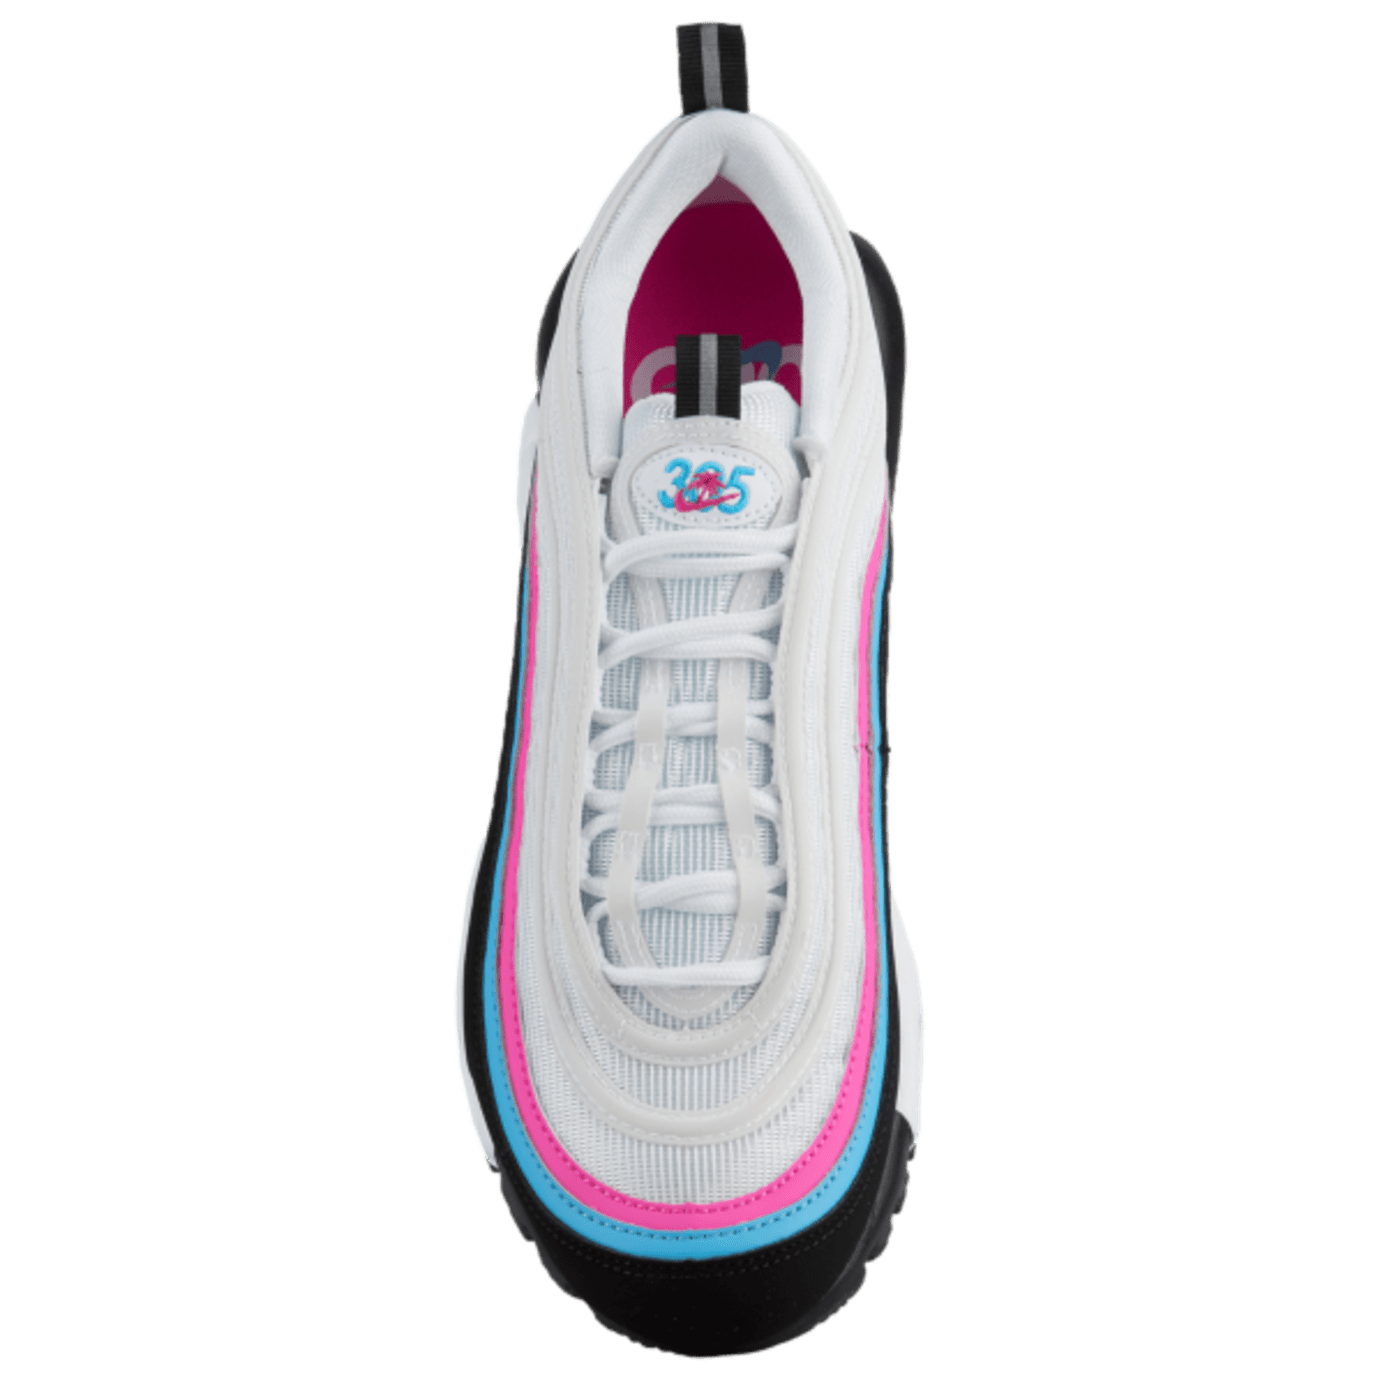 Nike Air Max Plus 97 'South Beach' Release Date | Sole Collector